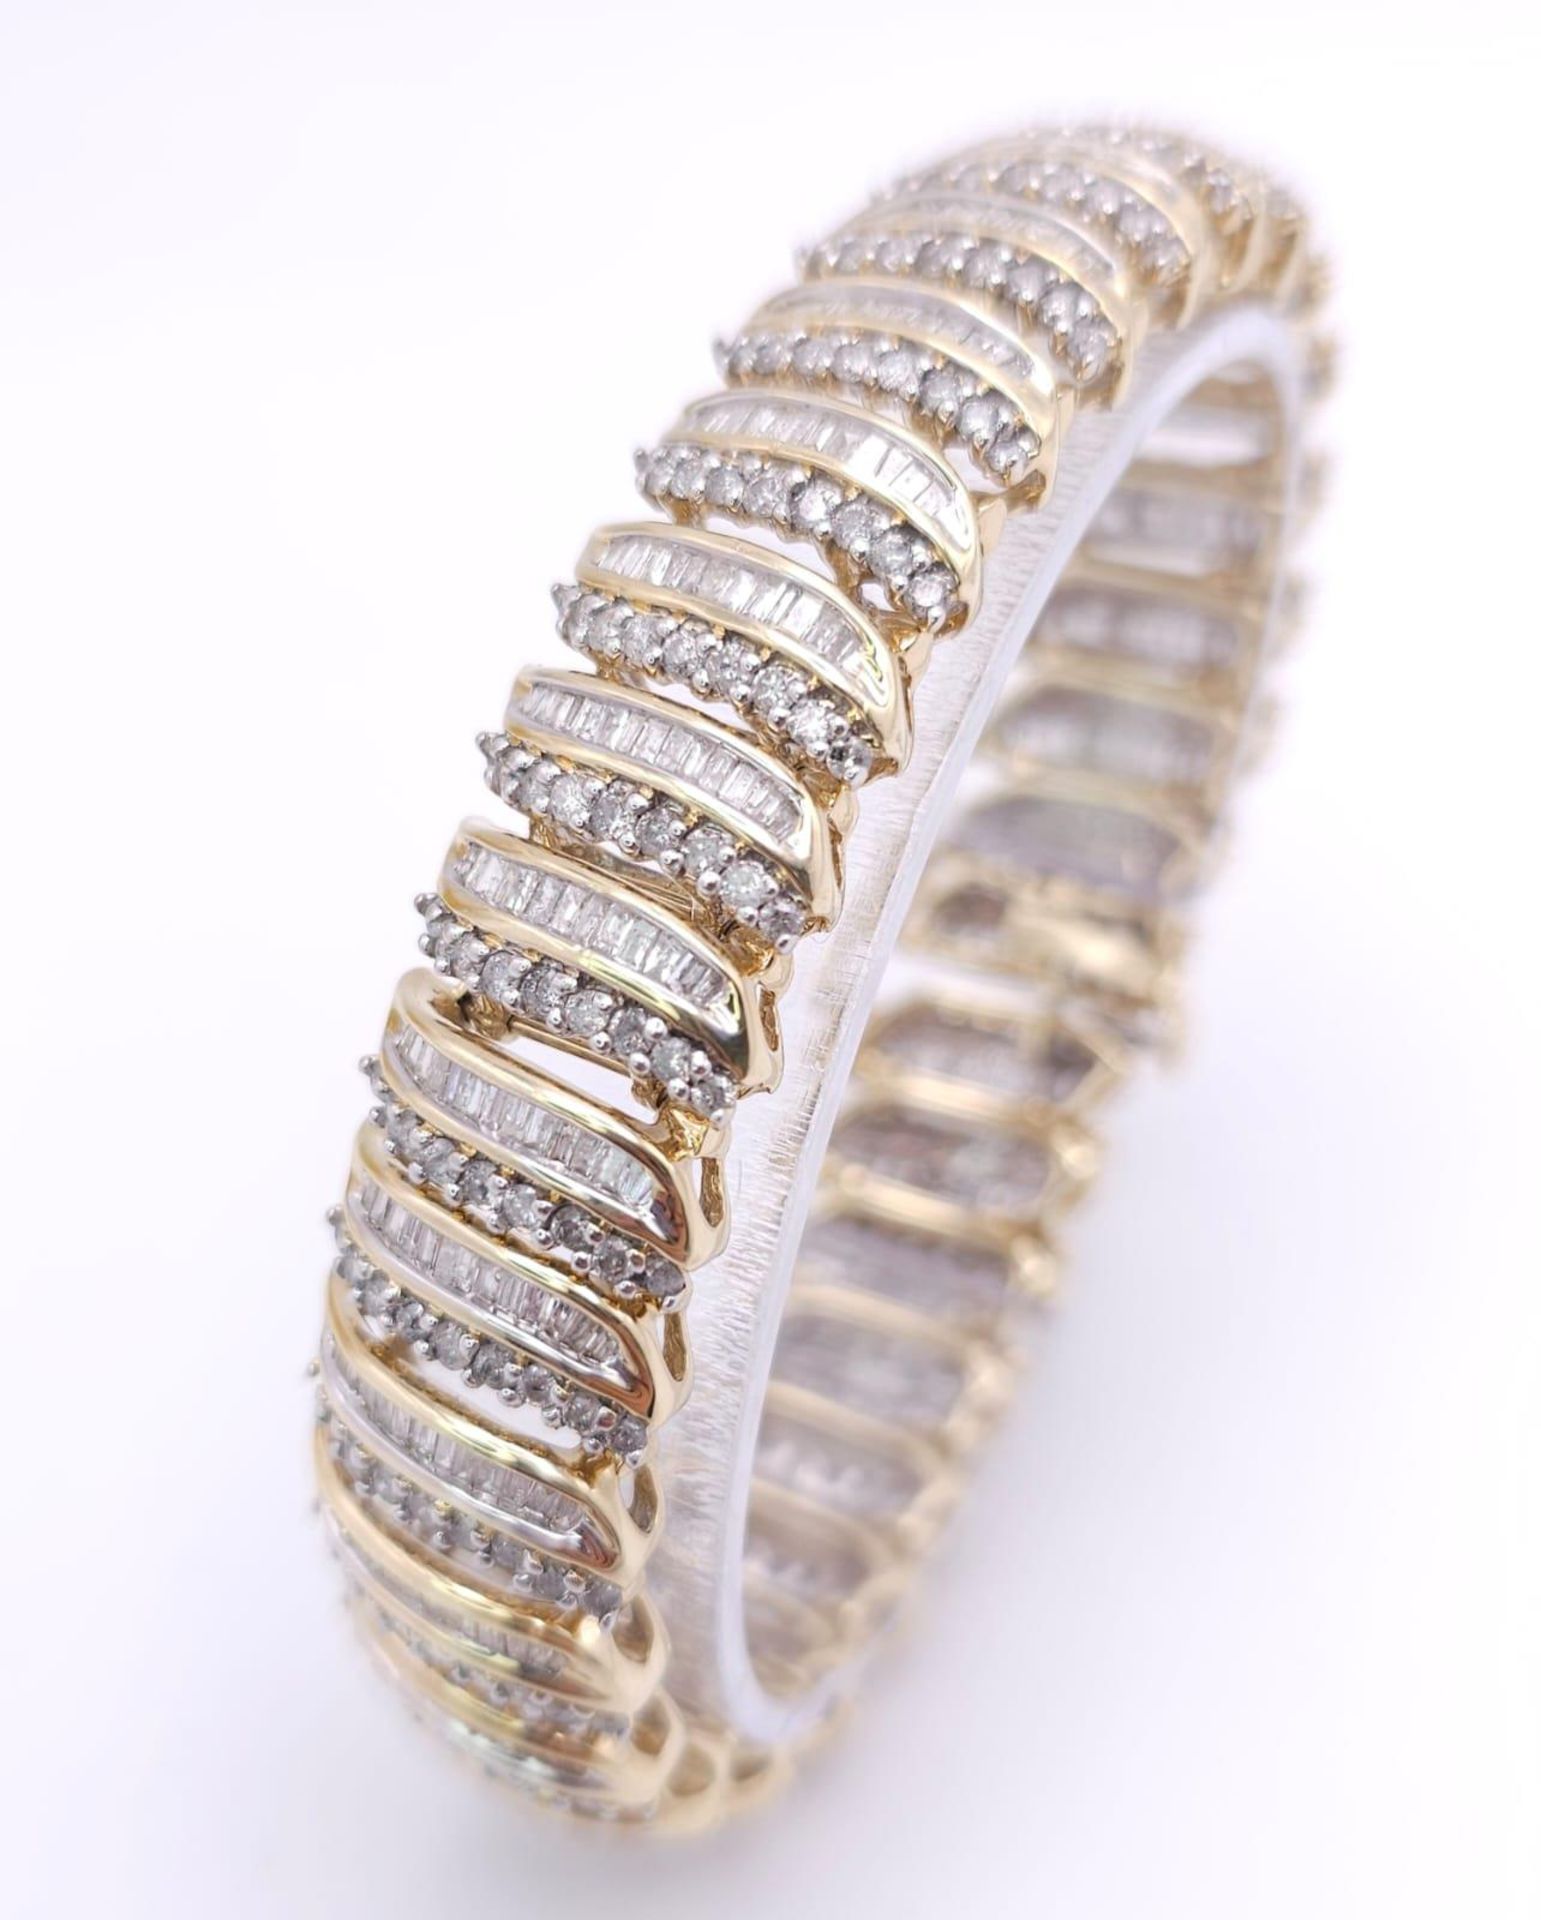 A BEAUTIFUL HEAD-TURNING 14K YELLOW GOLD DIAMOND TENNIS BRACELET WITH A MIXTURE OF ROUND AND